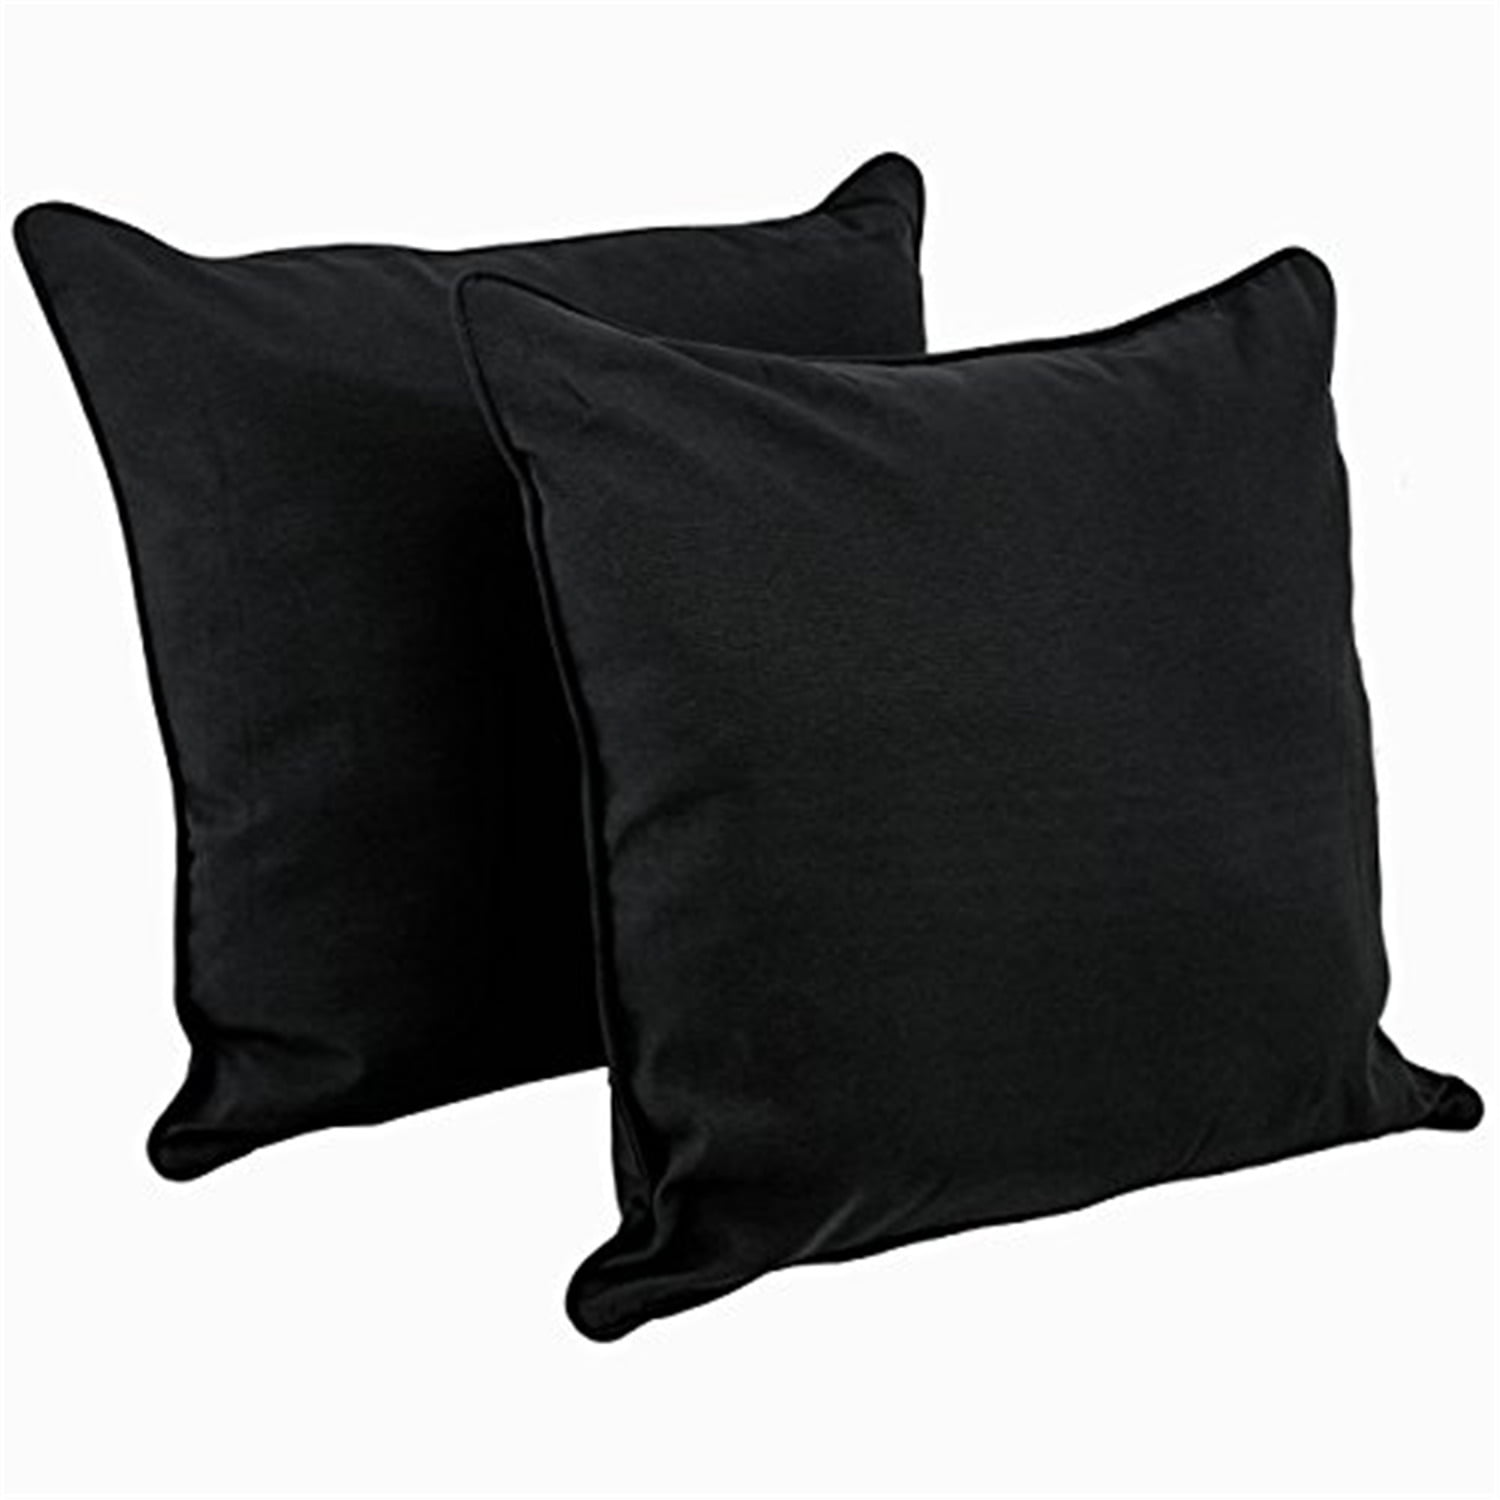 Picture of Blazing Needles 9813-CD-S2-TW-BK 25 in. Double-Corded Solid Twill Square Floor Pillows with Inserts, Black - Set of 2